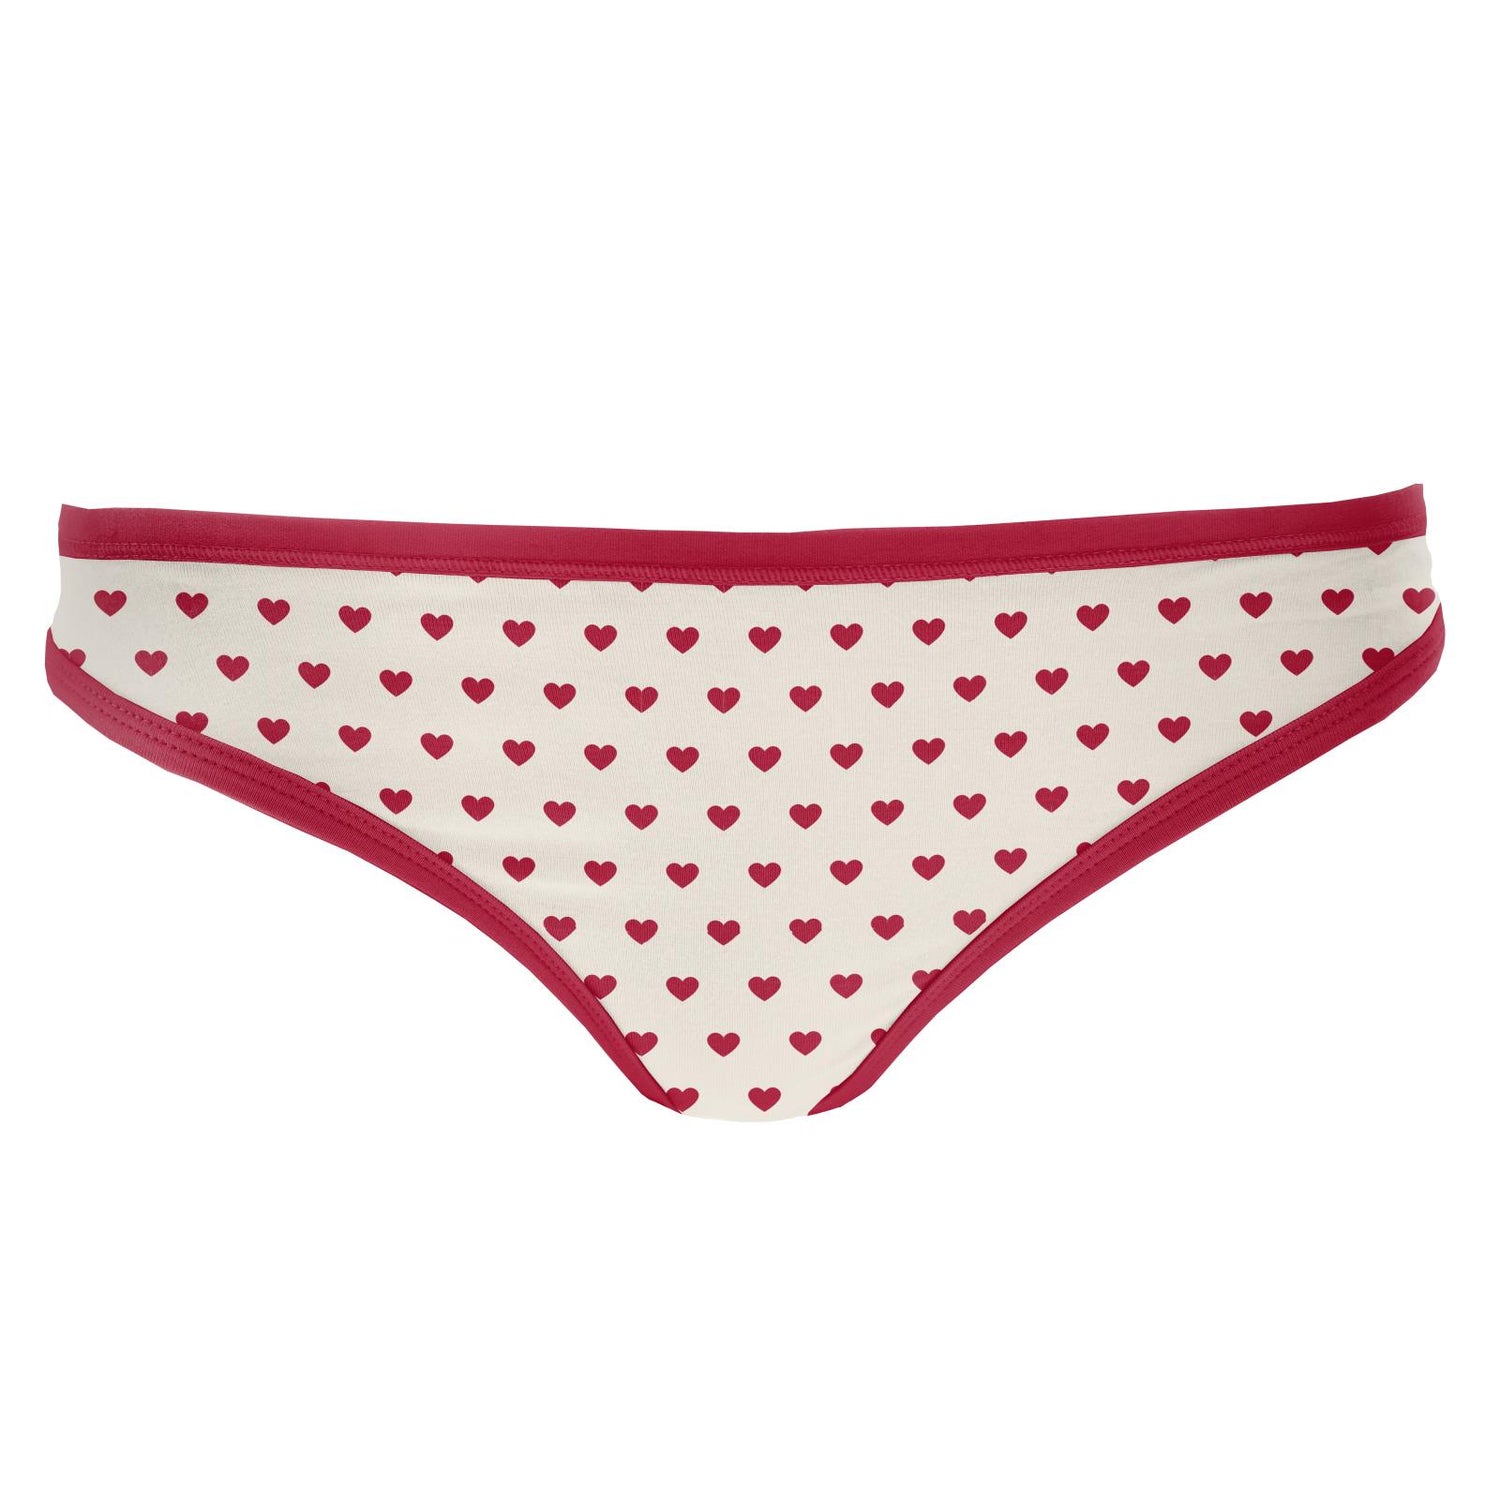 Women's Print Classic Thong Underwear in Natural Hearts